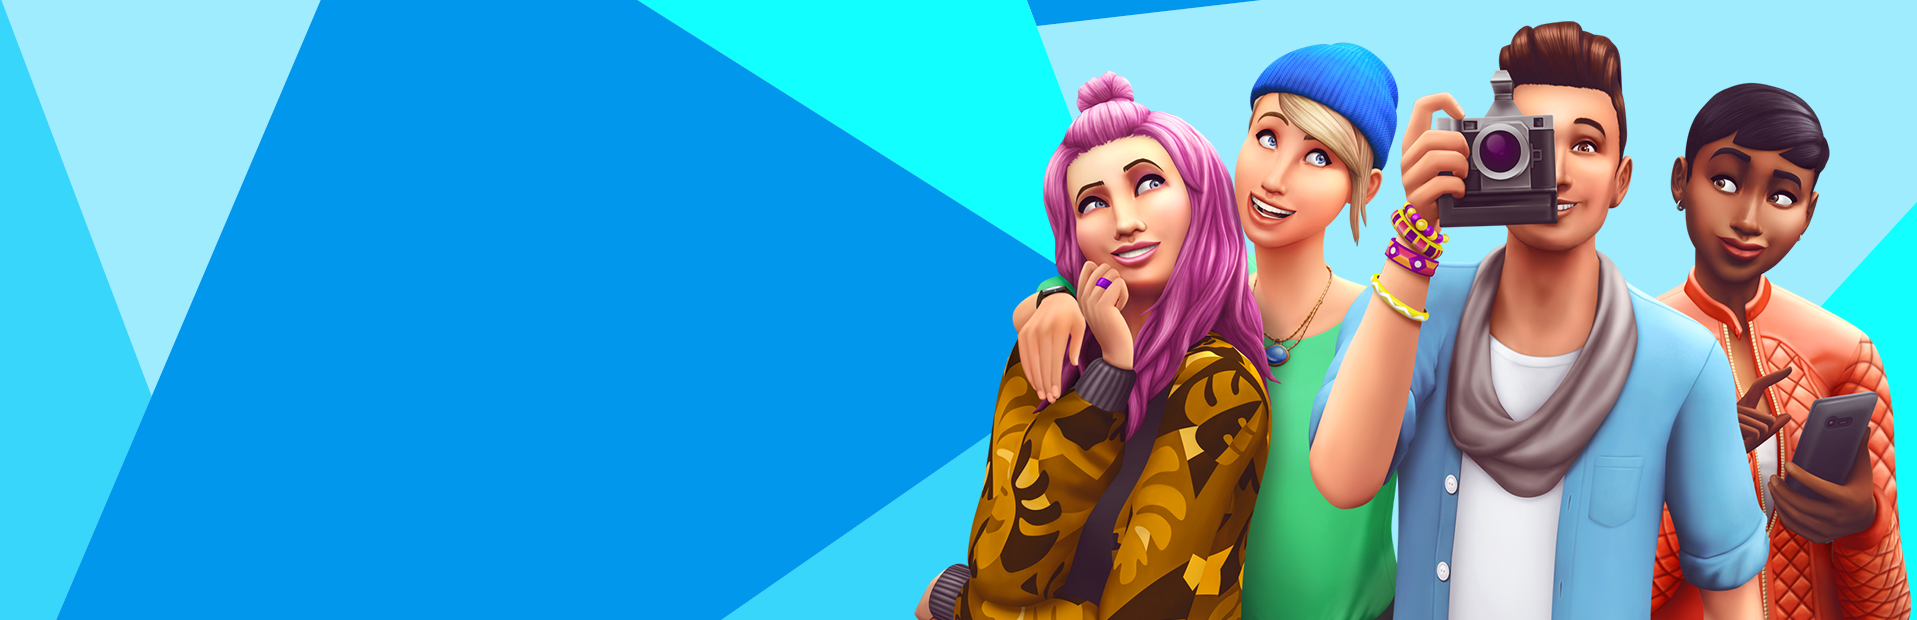 cheats for sims 4 deluxe edition pc